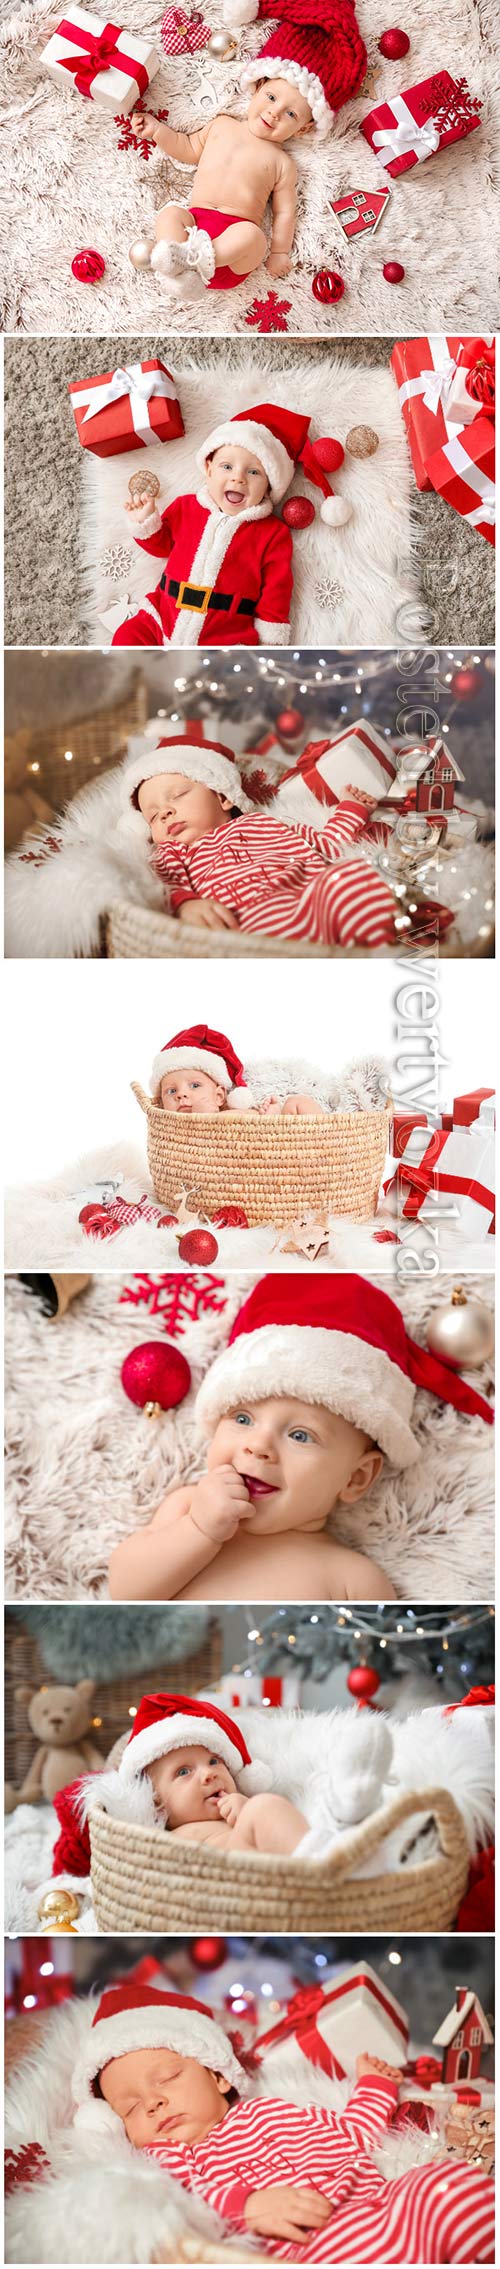 Cute little baby in Santa Claus hat and with Christmas gifts lying on plaid